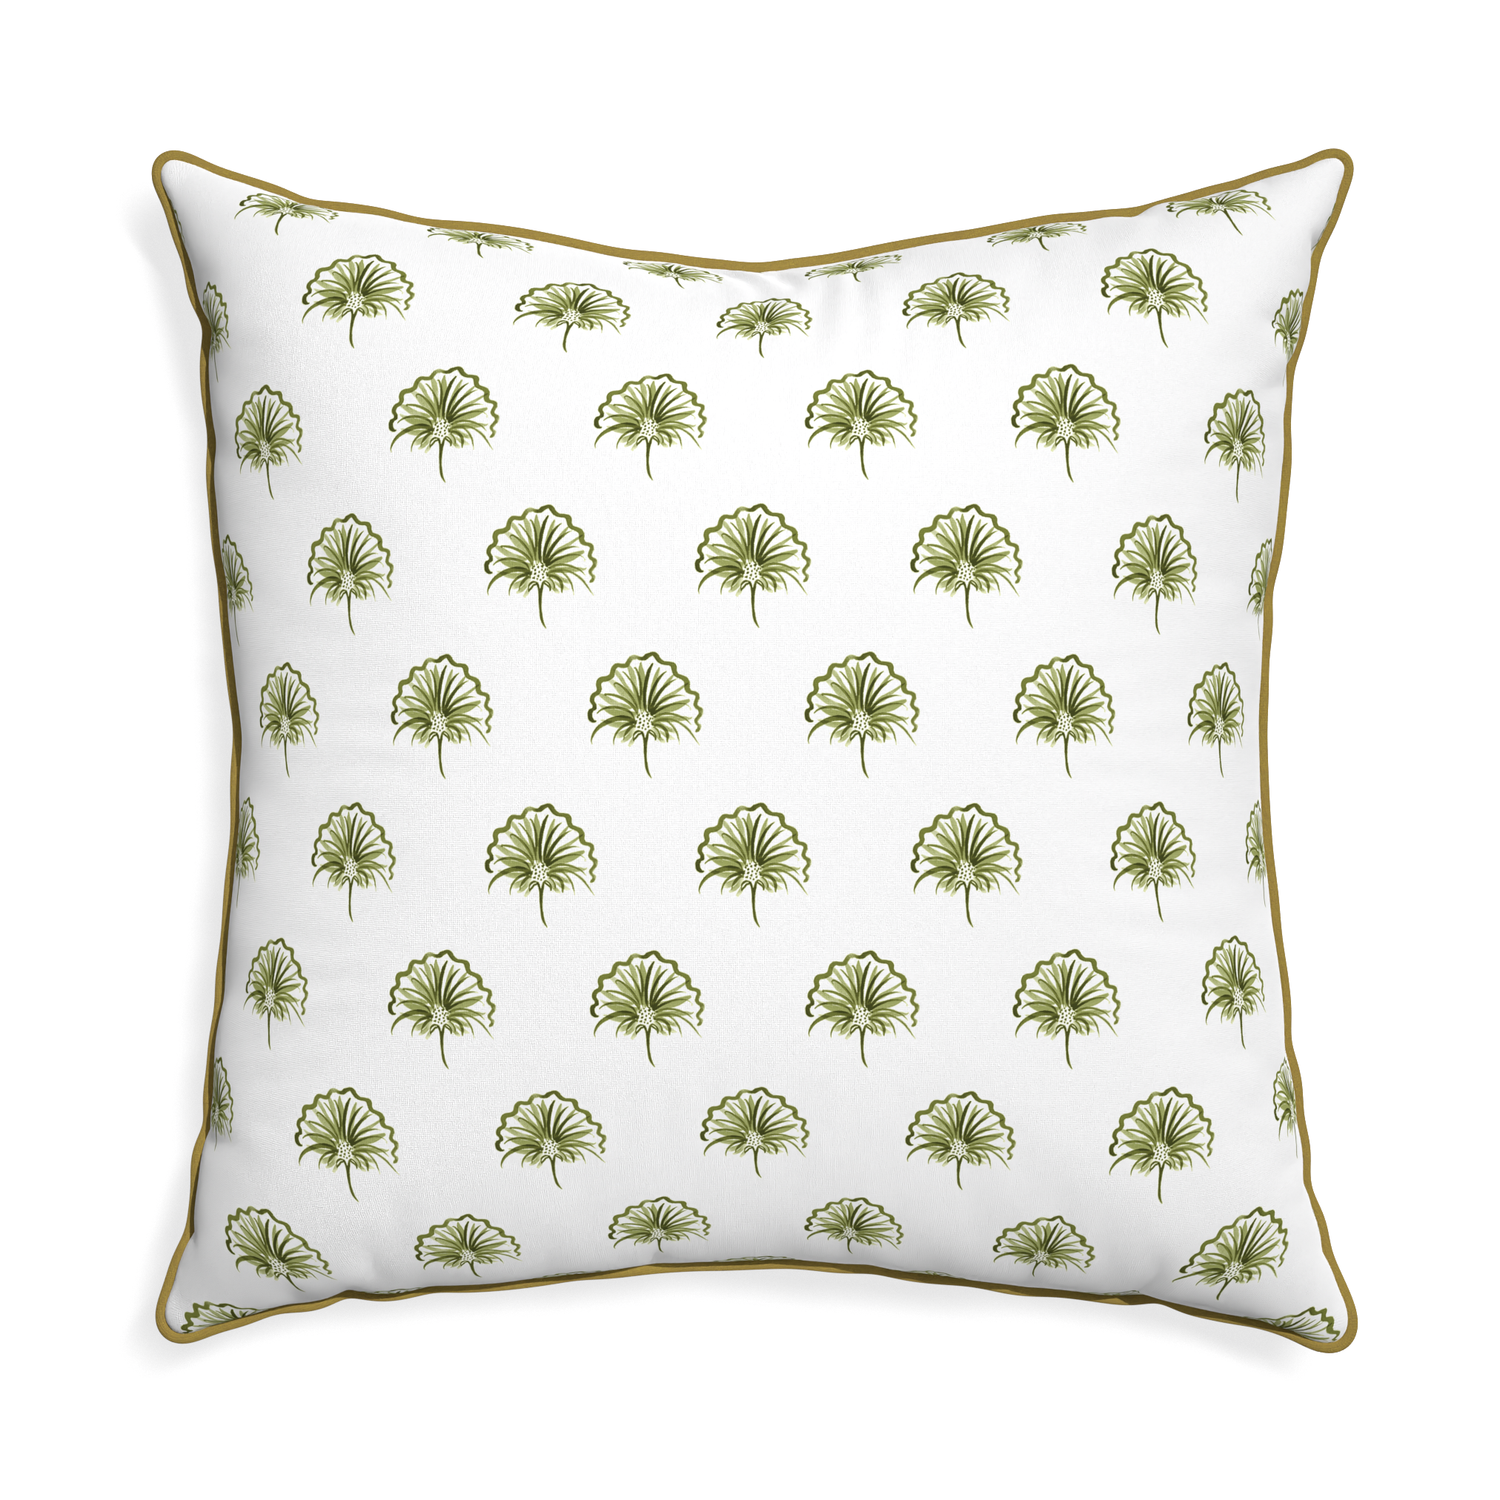 Euro-sham penelope moss custom green floralpillow with c piping on white background